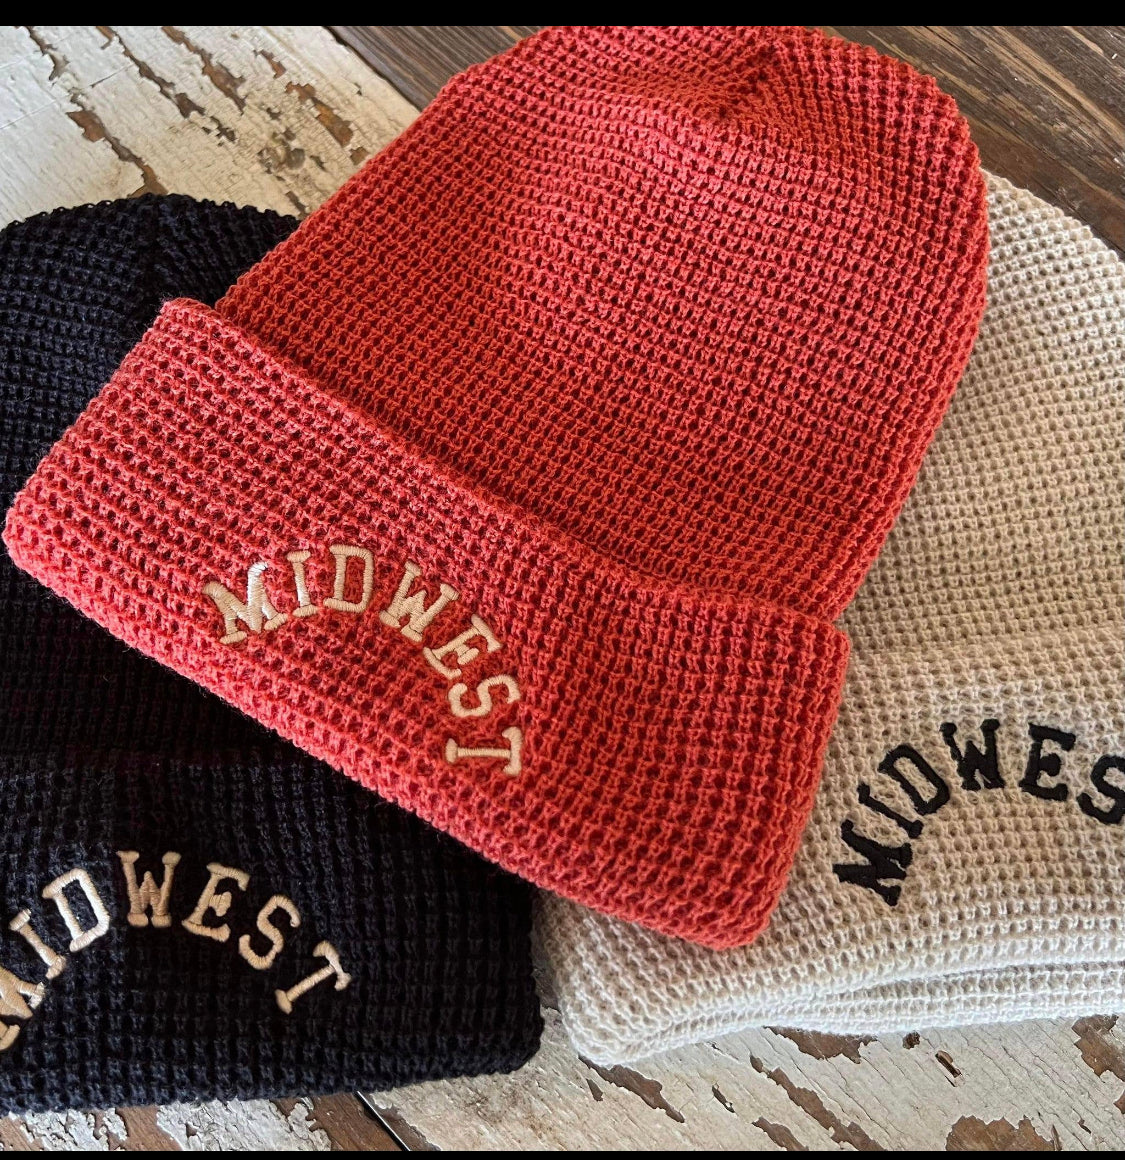 MIDWEST - Hat